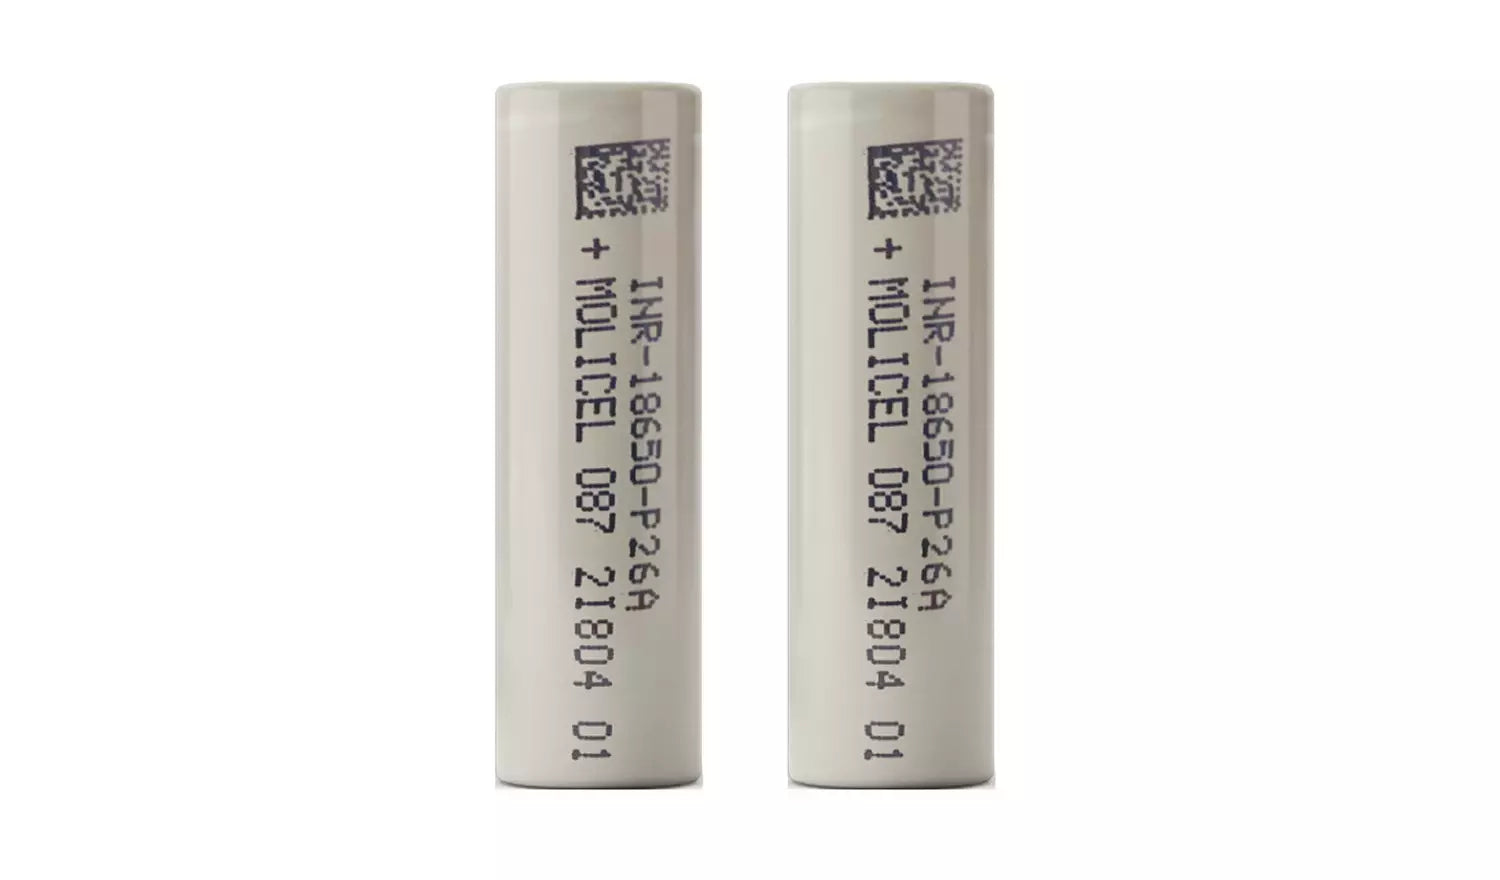 Molicel P26A 18650 Rechargeable Battery x 2 